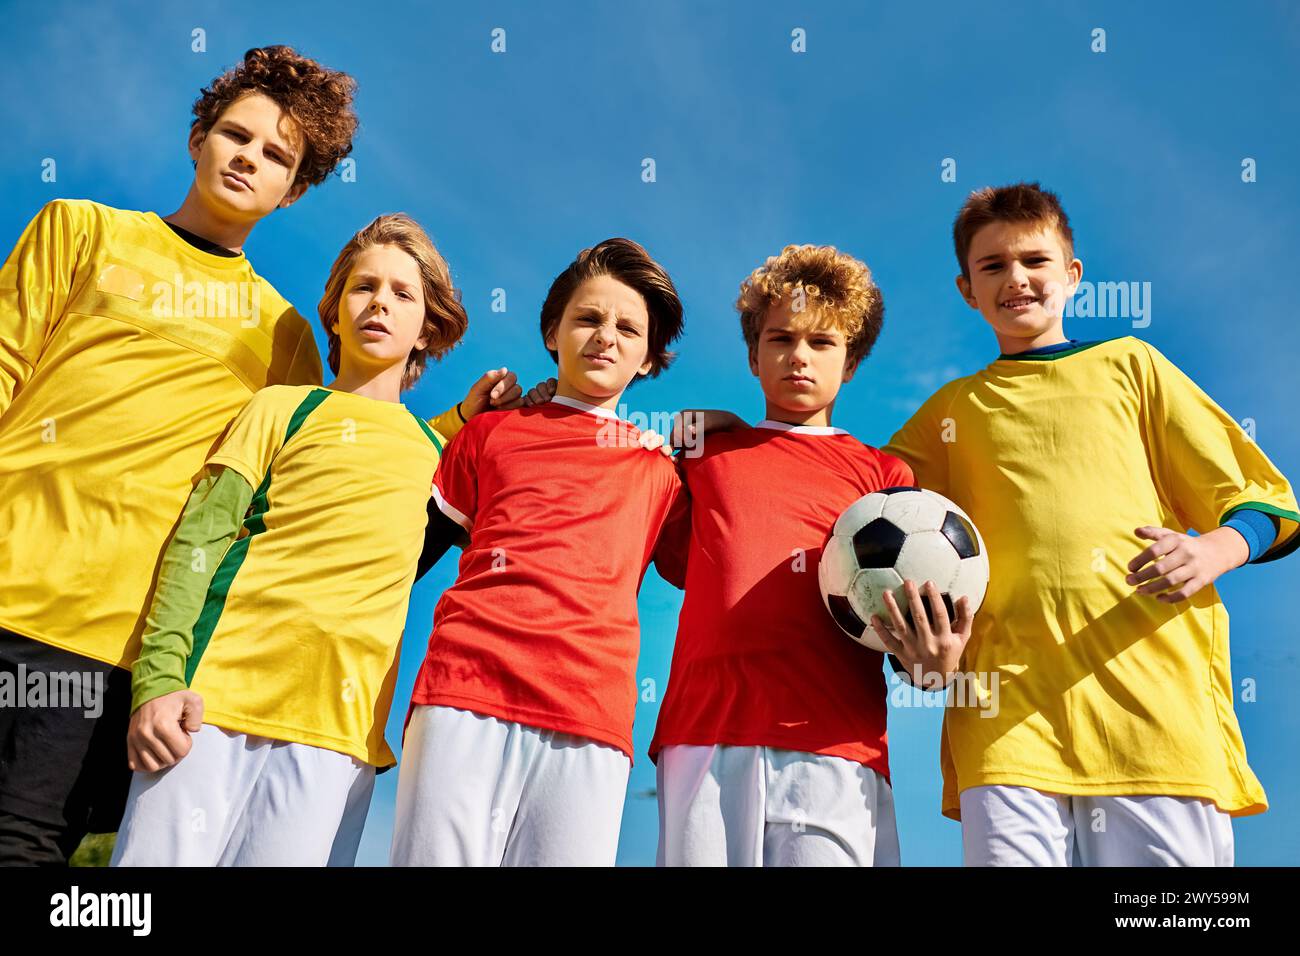 A group of young men standing closely together, holding a soccer ball, showcasing teamwork and camaraderie. Stock Photo